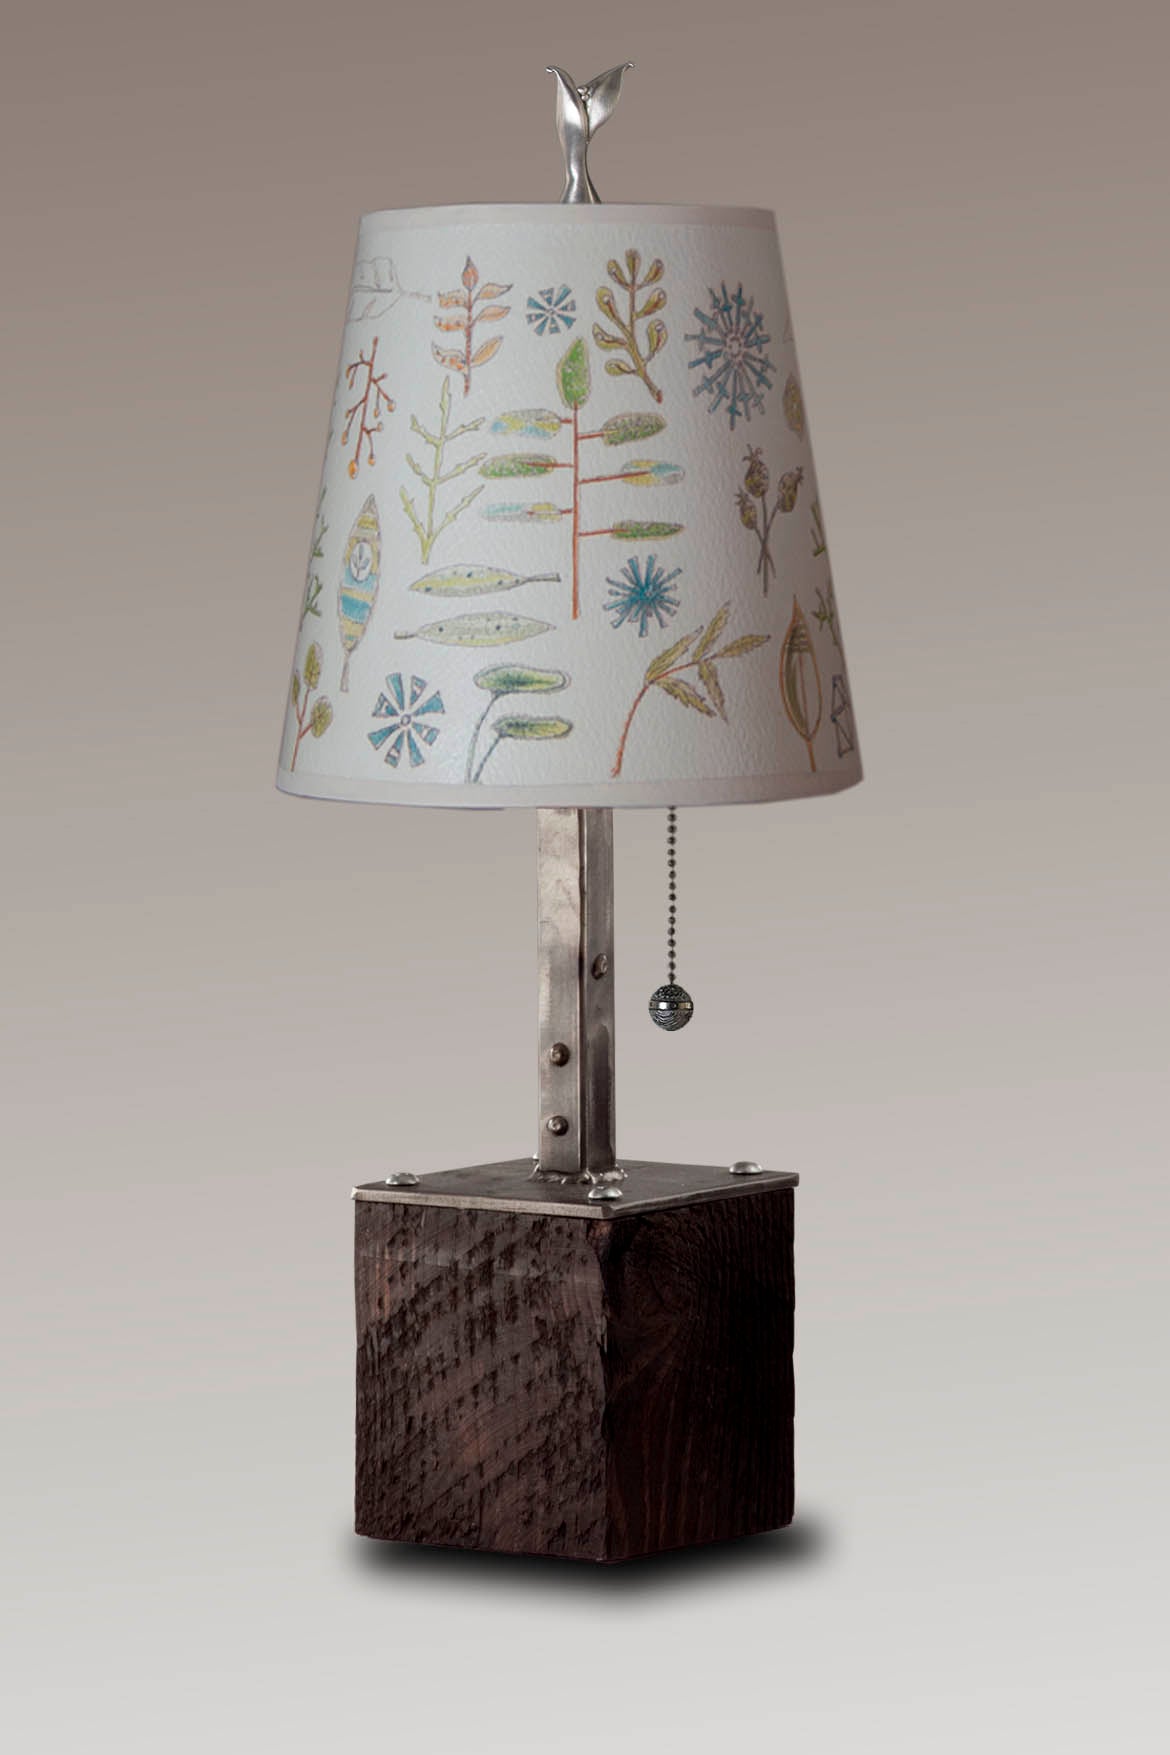 Janna Ugone &amp; Co Table Lamp Steel Table Lamp on Reclaimed Wood with Small Drum Shade in Field Chart